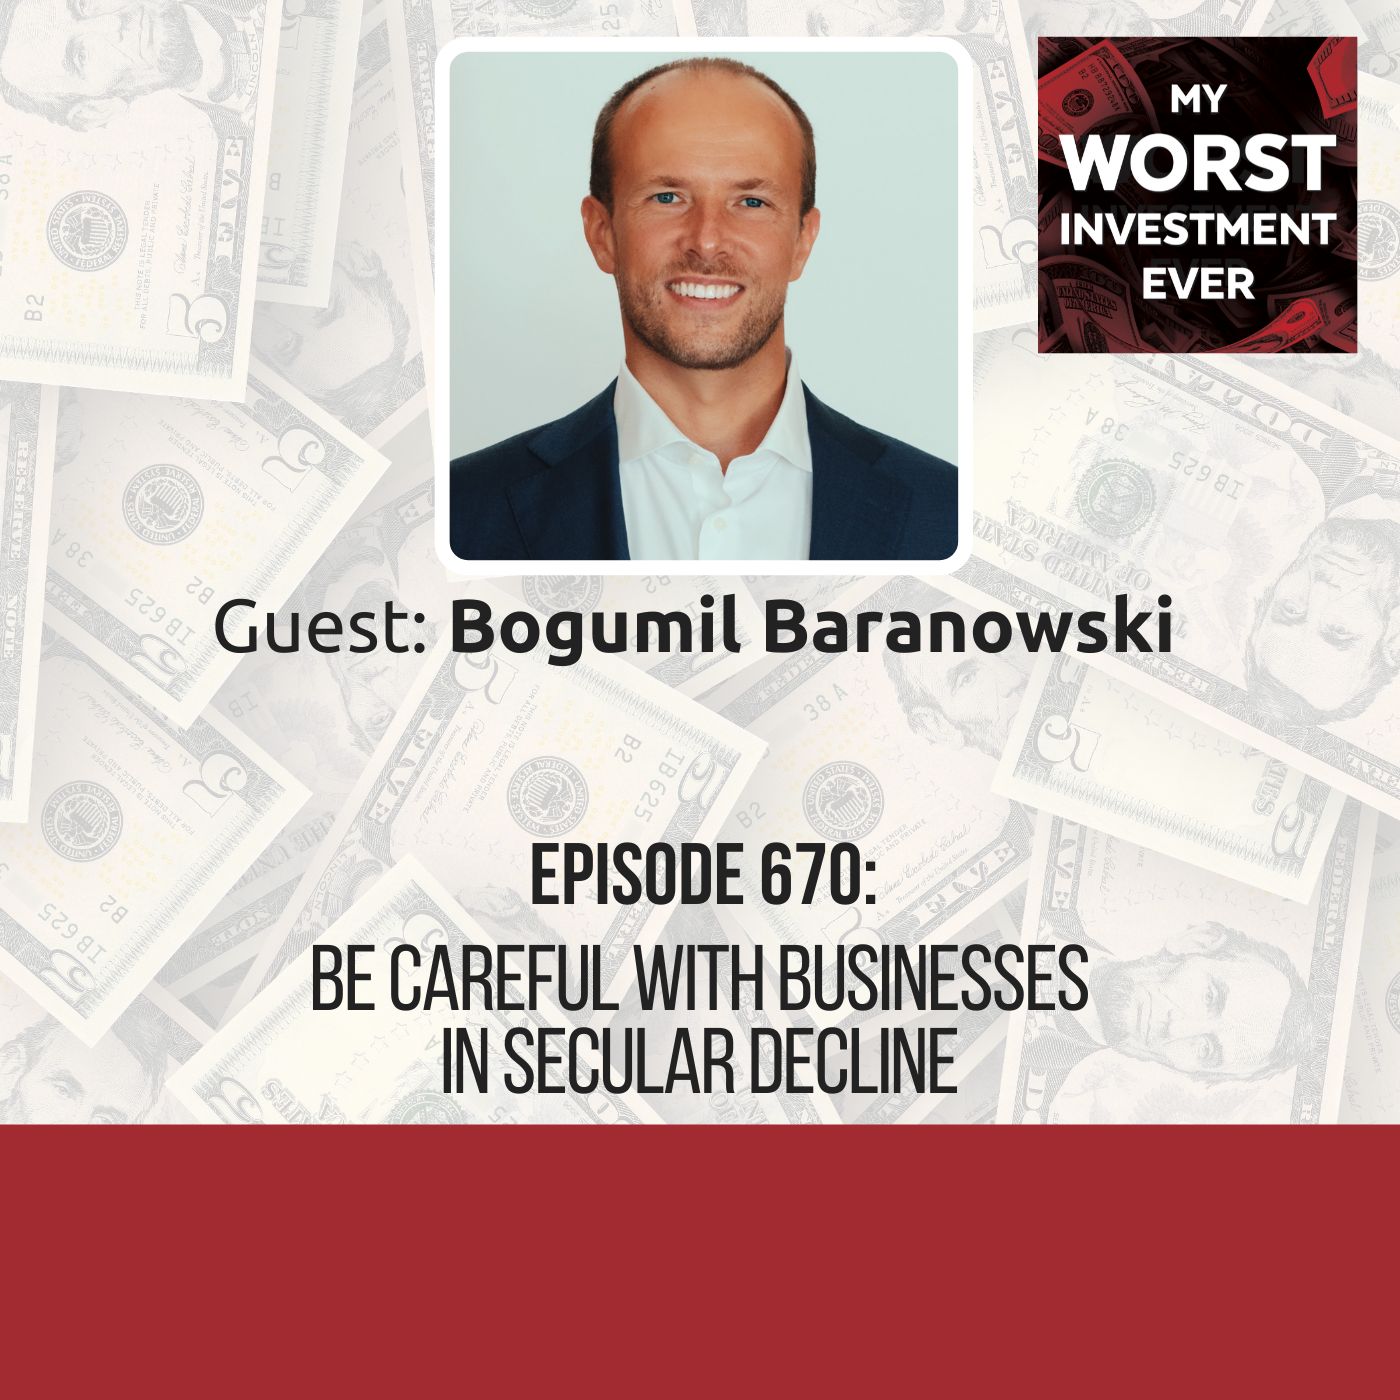 Bogumil Baranowski – Be Careful With Businesses in Secular Decline